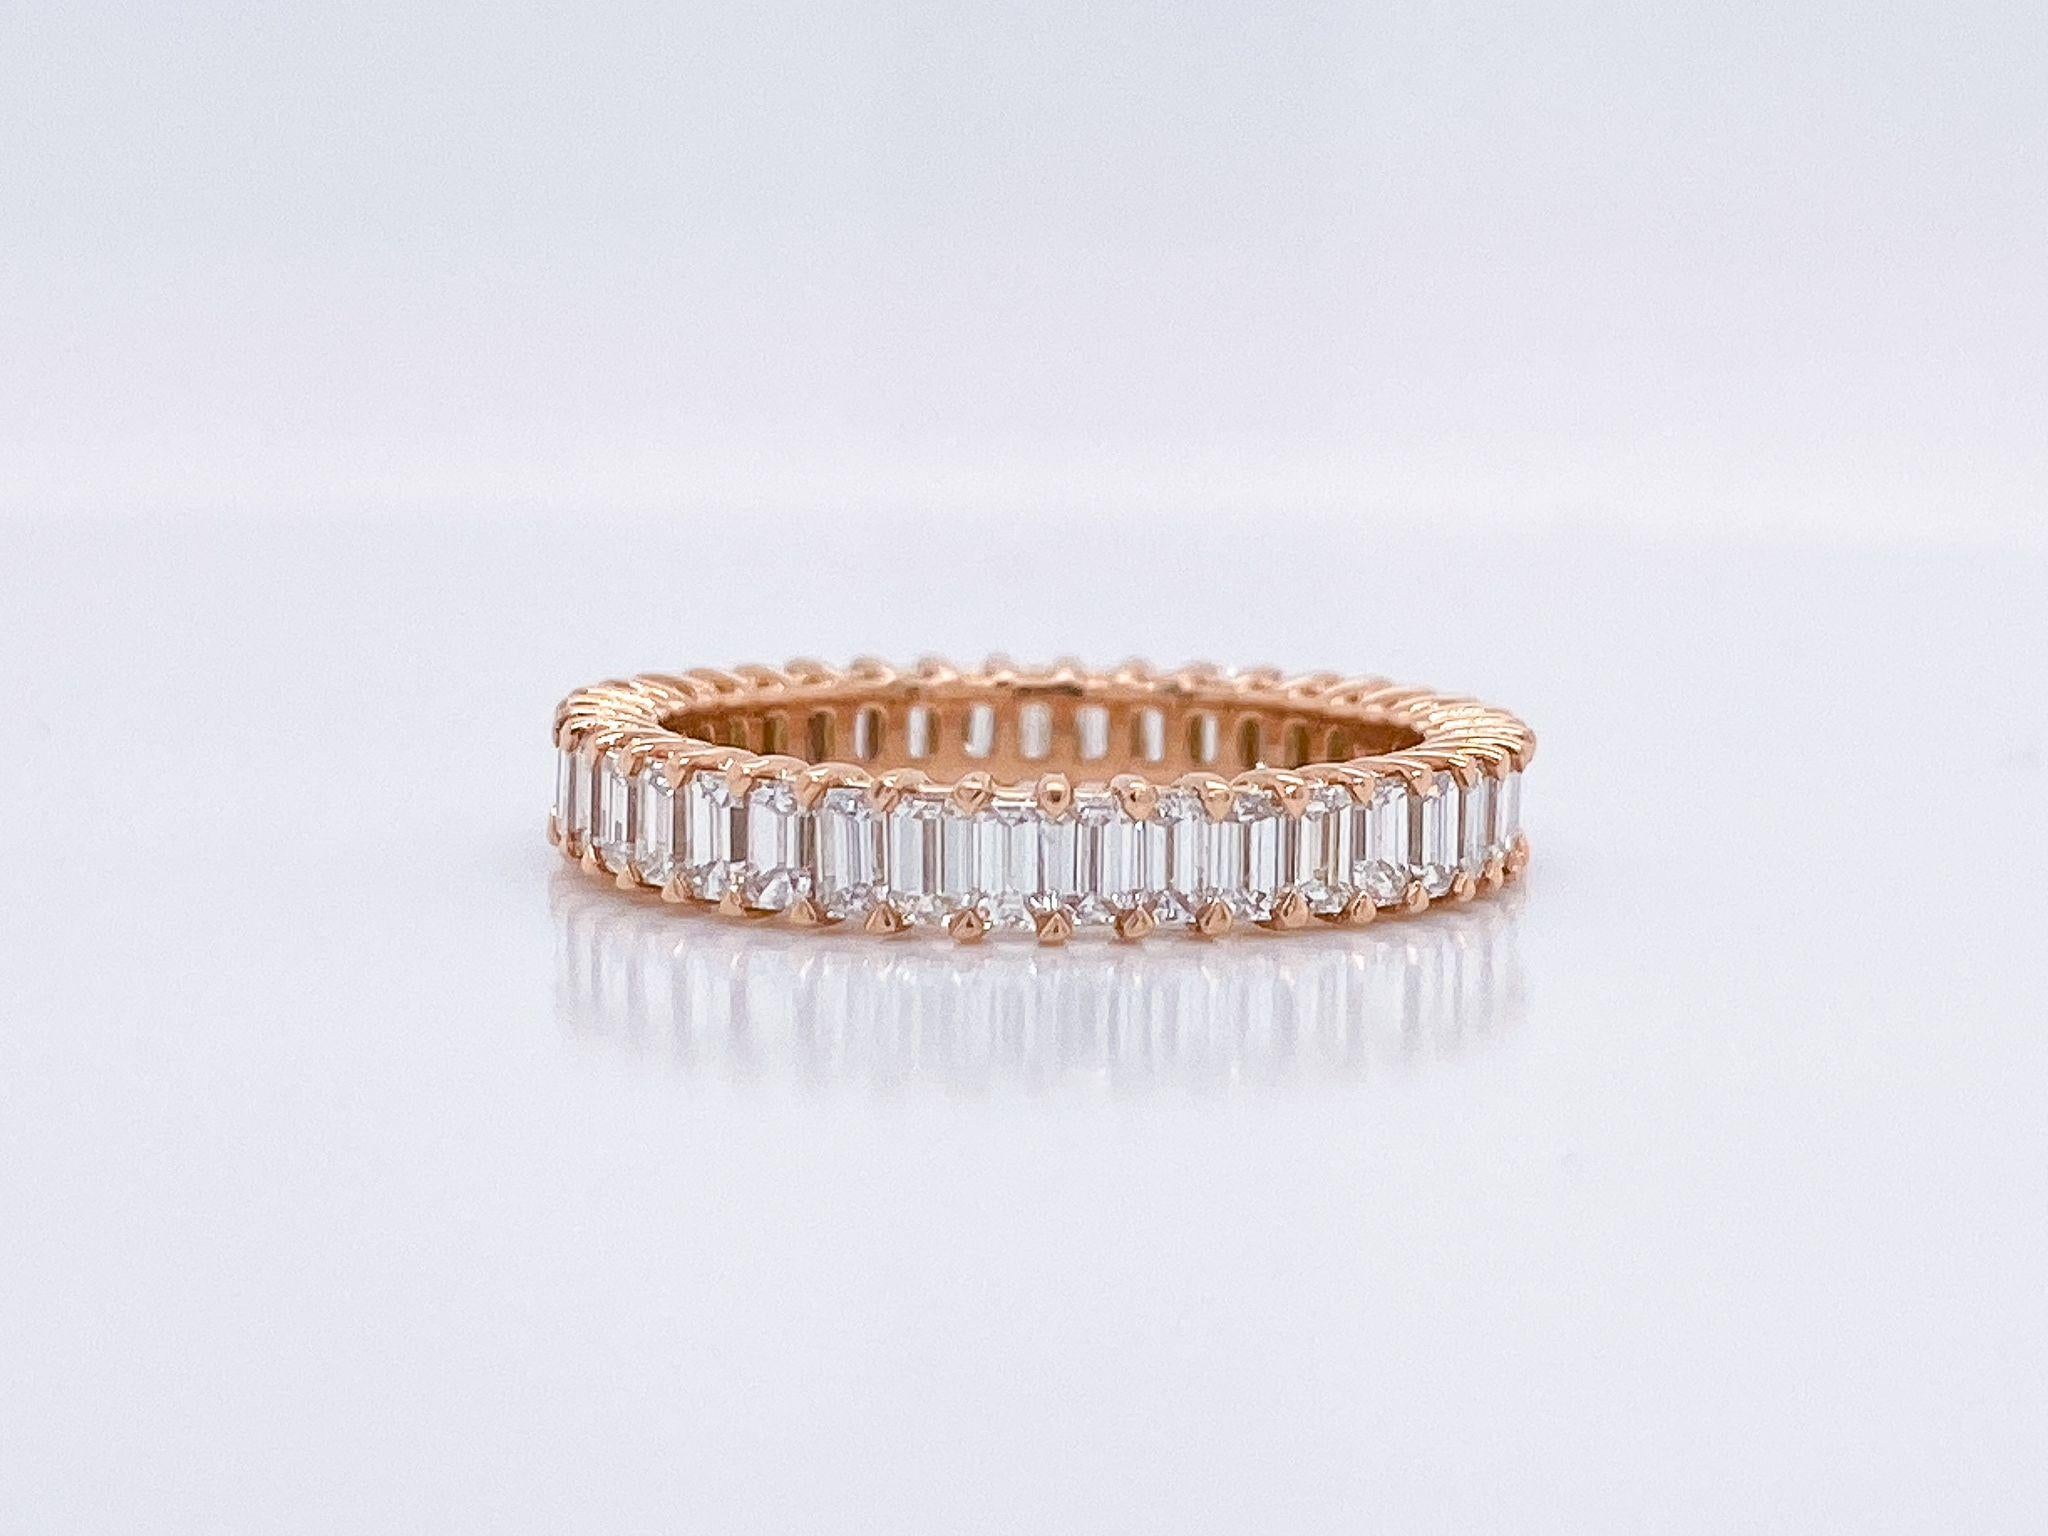 Imagine the look on her face when she sees this Emerald Cut Diamond Eternity Band; featuring 39 Emerald Cut Diamonds, weighing 1.95 Total Carat Weight. These diamonds are H Color, VS Clarity, and are set in a 18K Rose Gold setting in a finger size